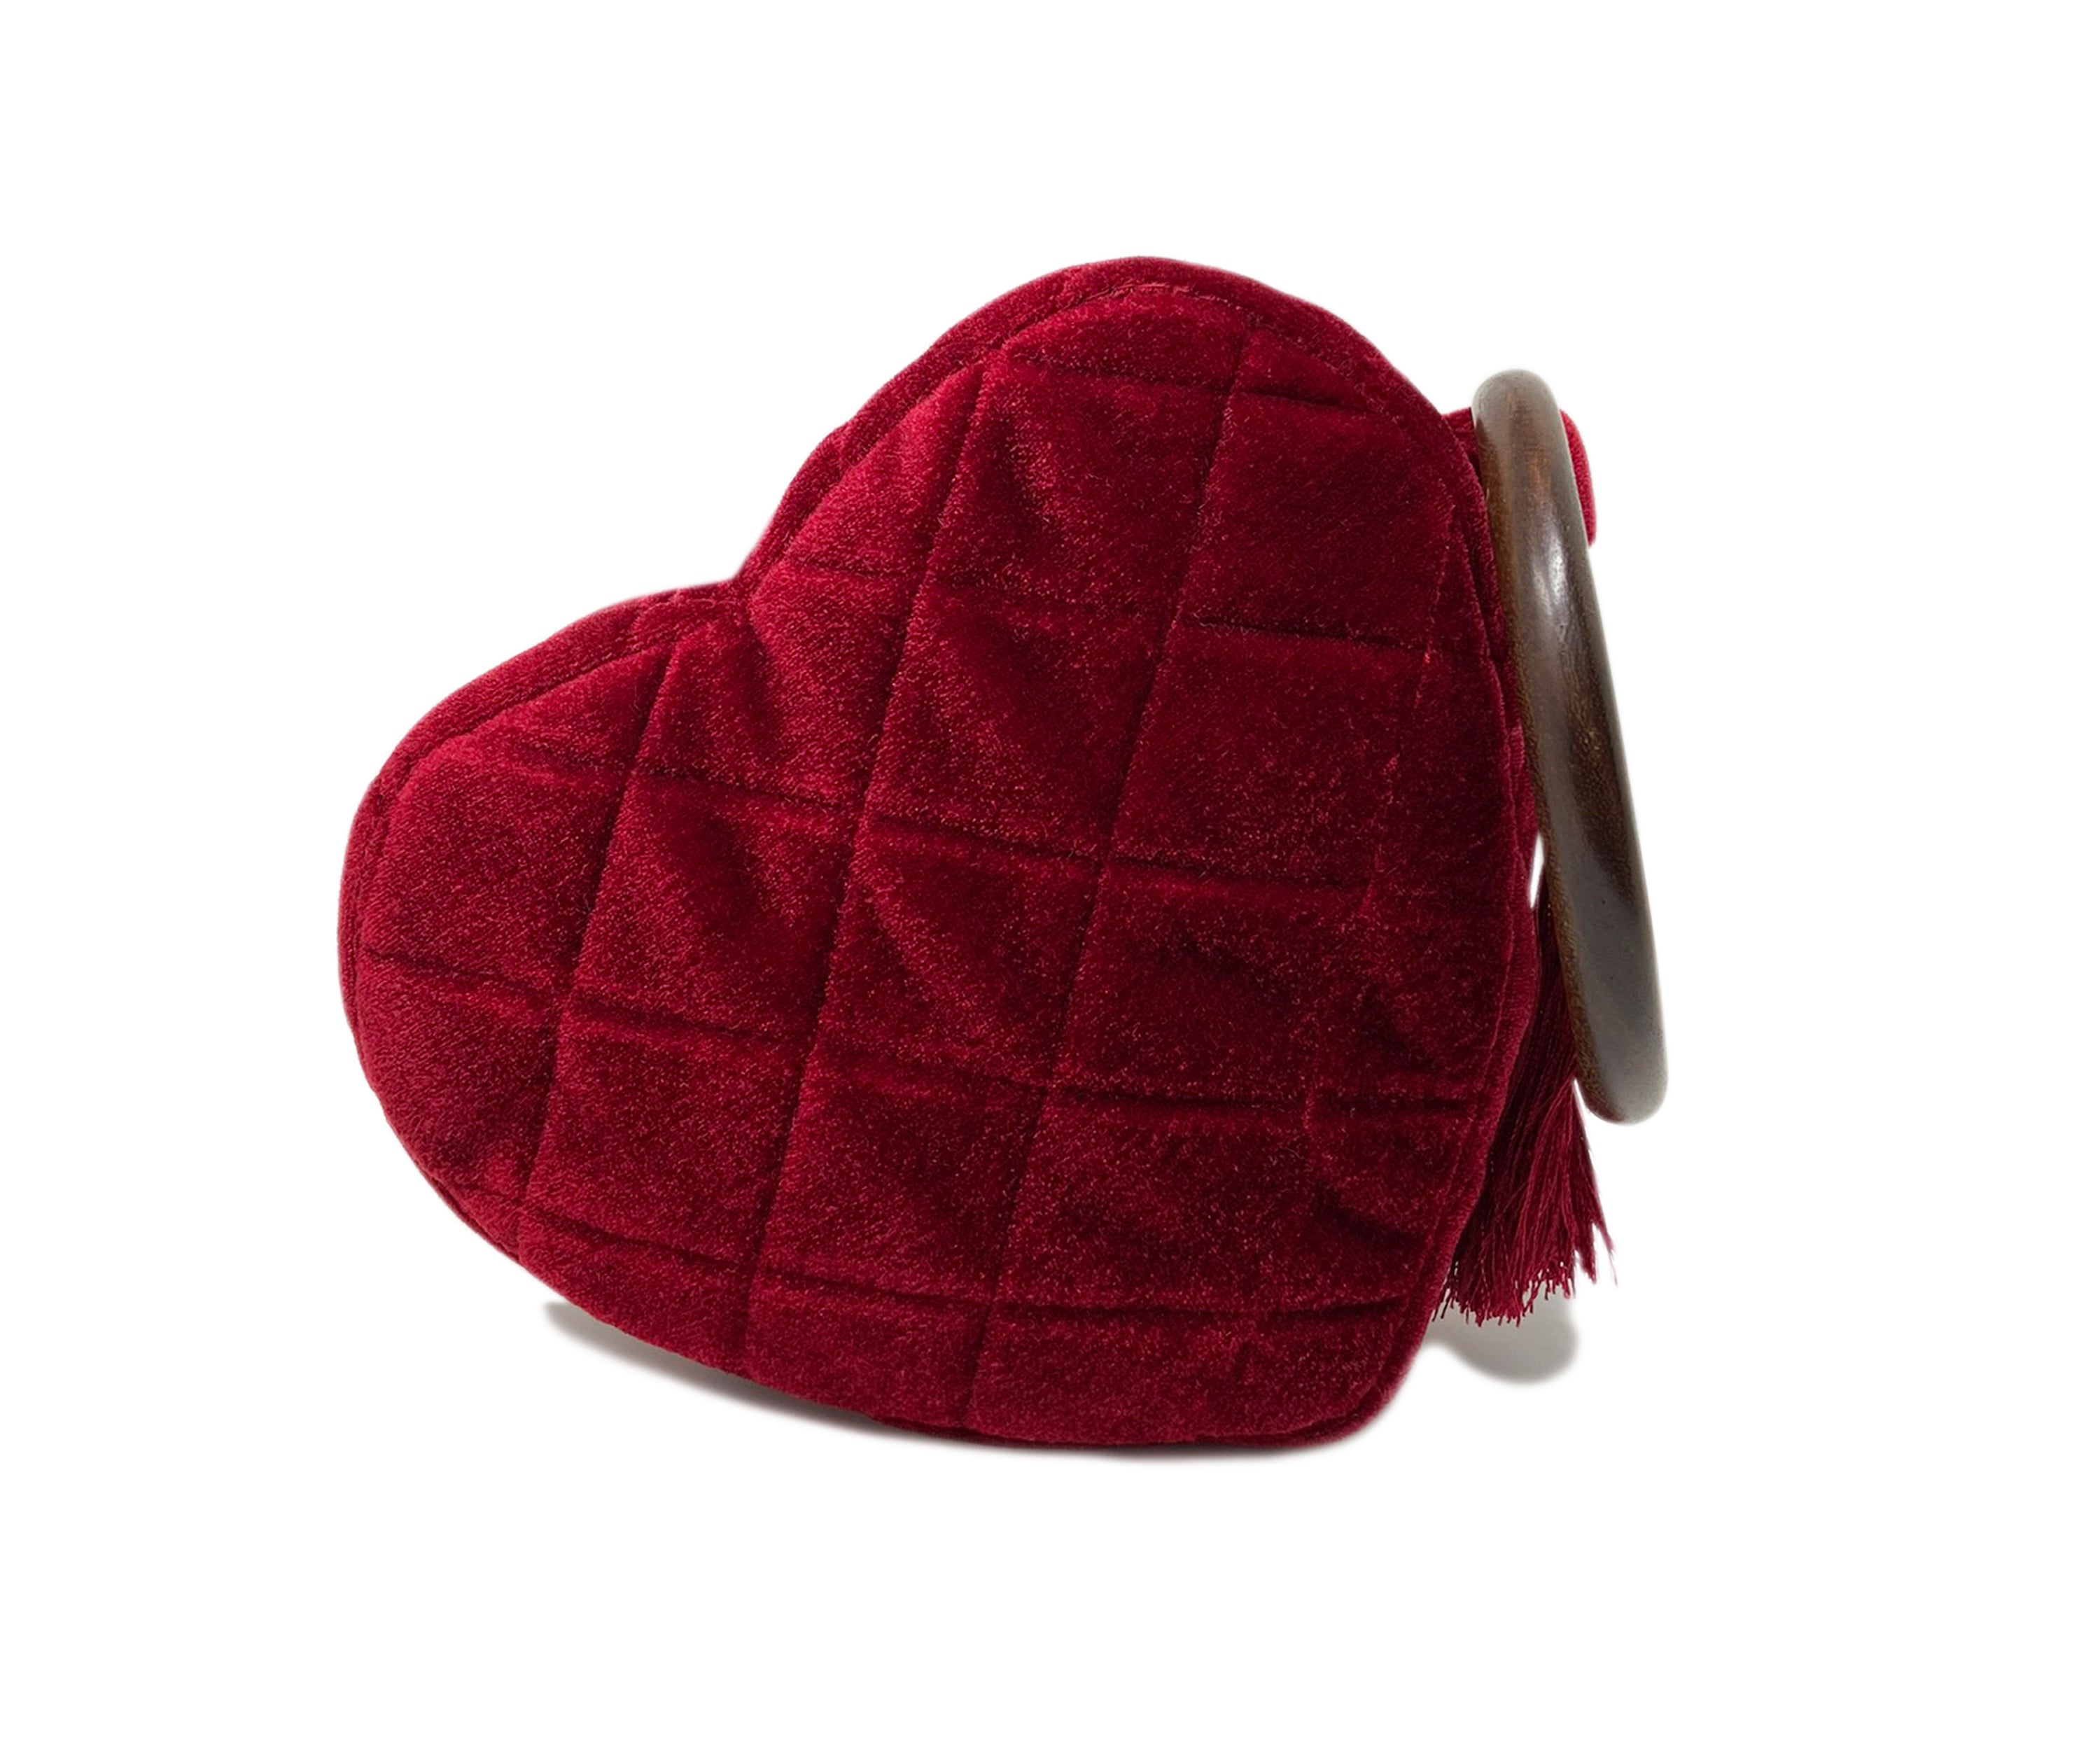 Amore Beaute unique small red purse is handmade from plush velvet with minute attention to detail. 